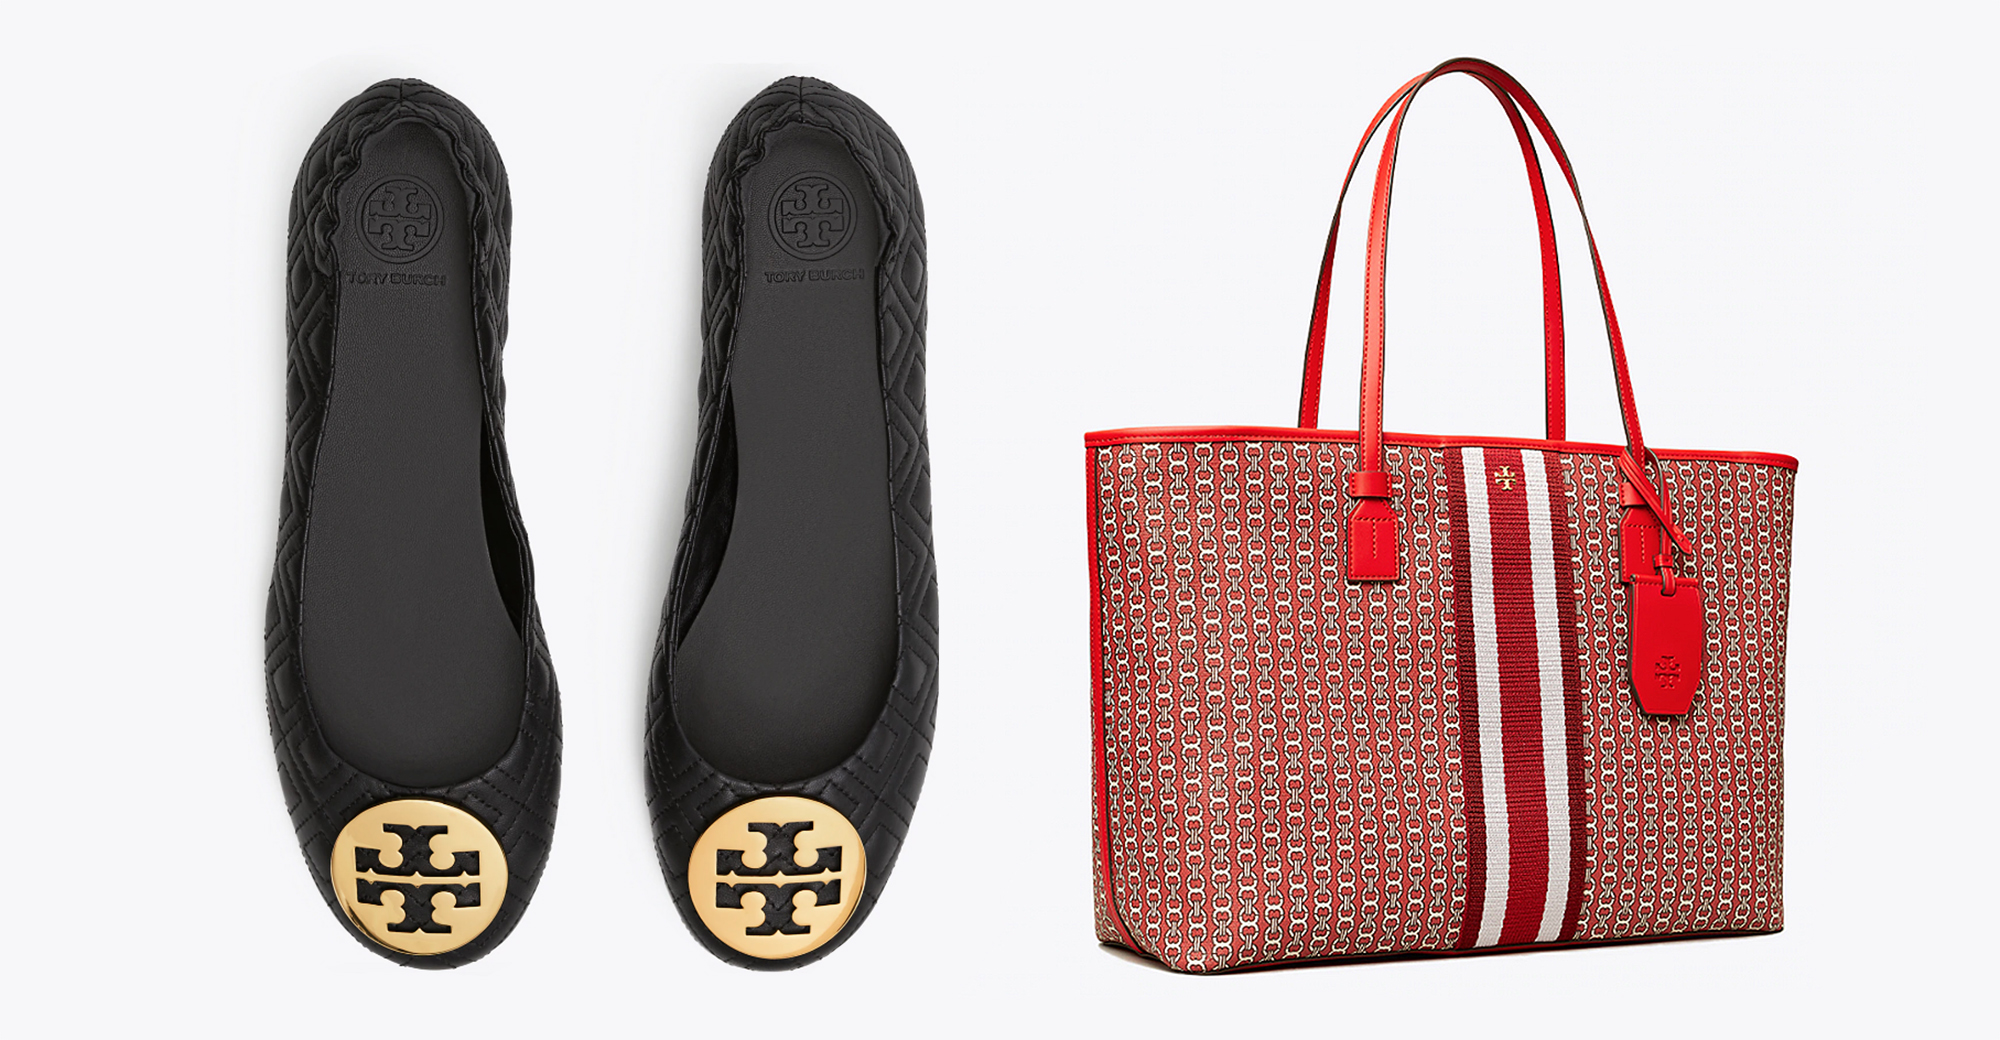 Tory Burch Cyber Monday: Get Up to 60% Off These Bestsellers